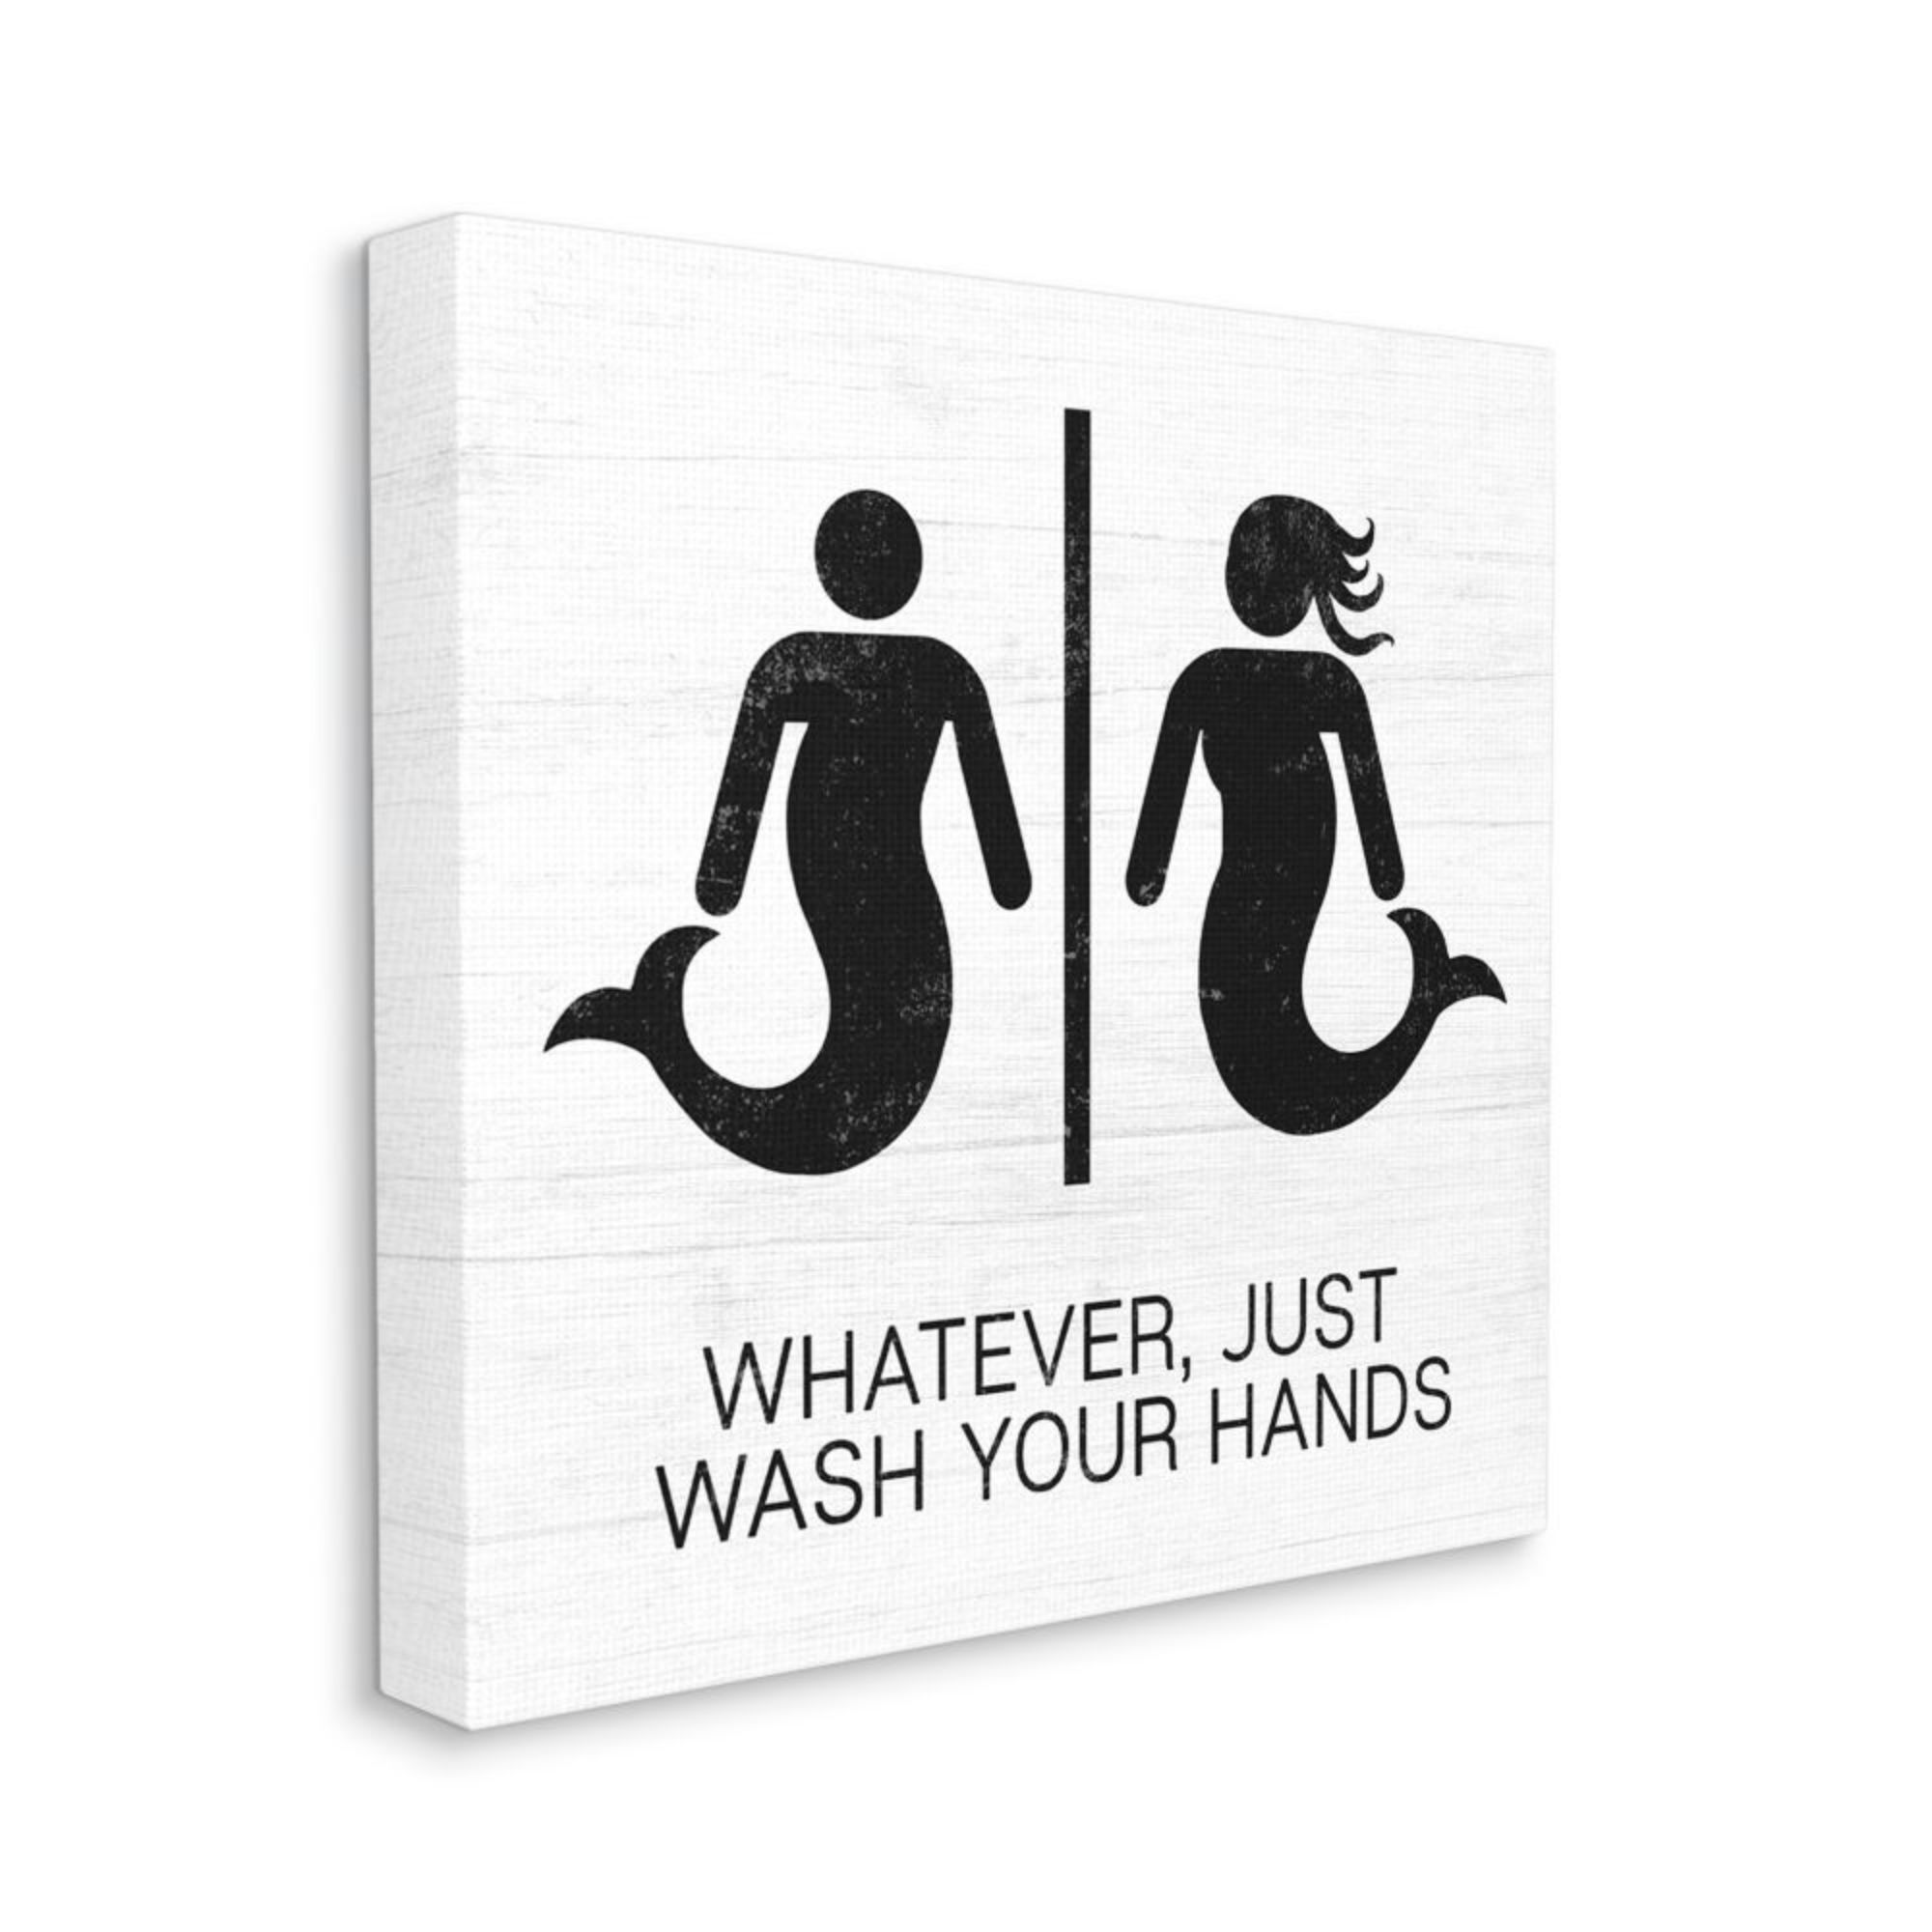 Stupell Industries Just Wash Your Hands Mermaid Bathroom Sign 